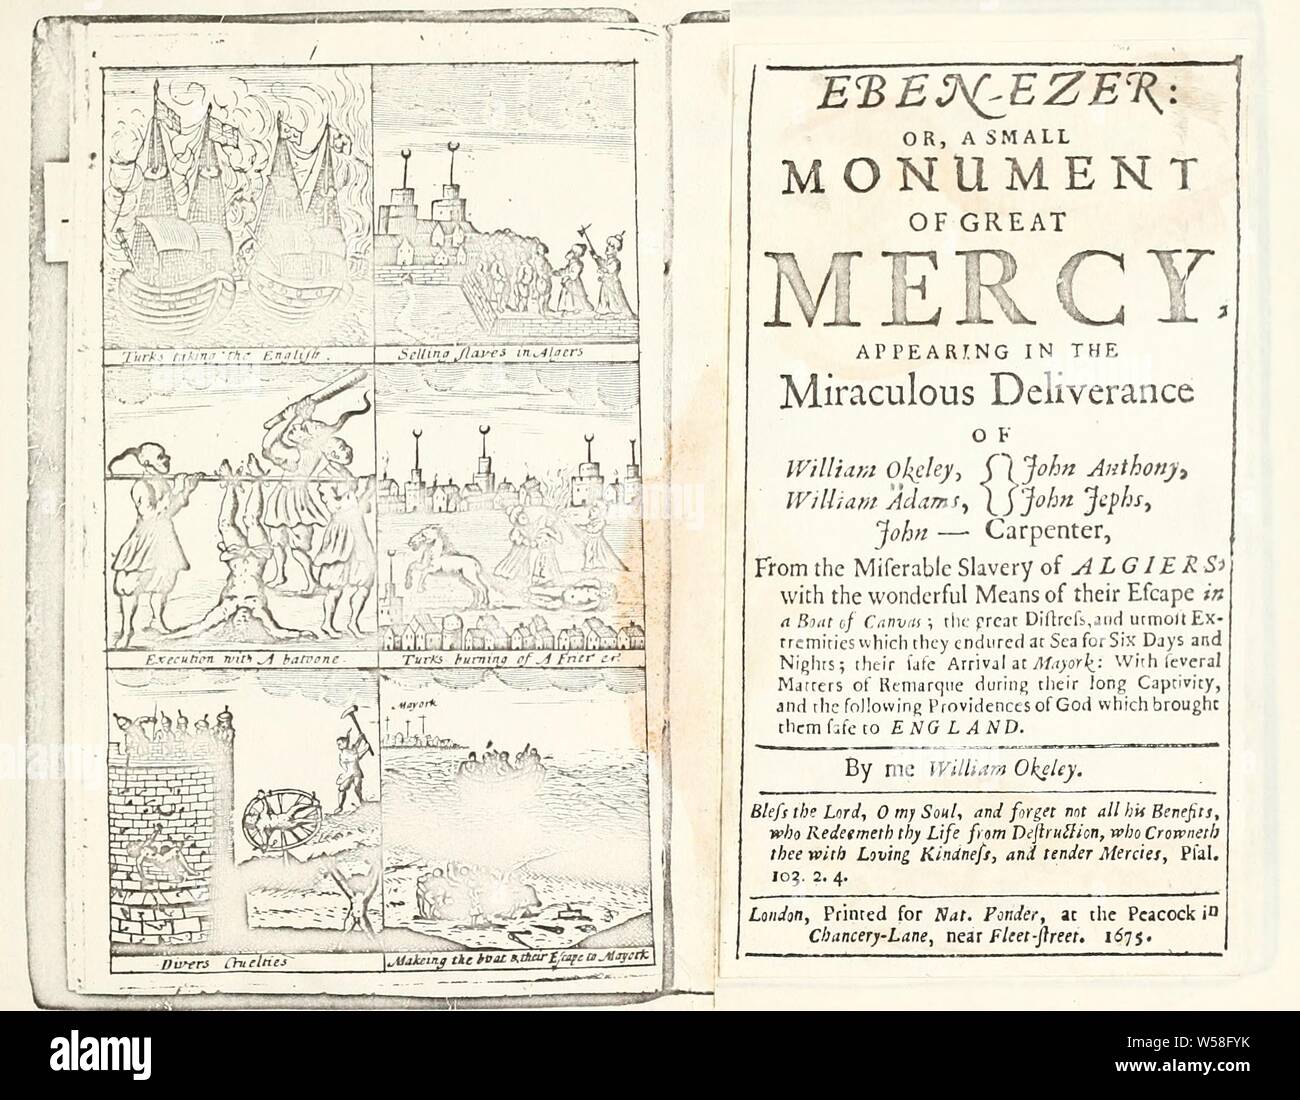 Eben-ezer, or, A small monument of great mercy [electronic resource] : appearing in miraculous deliverance of William Okeley, William Adams, John Anthony, John Jephs, John ---, carpenter, from the miserable slavery of Algiers, with the wonderful means of their escape in a boat of canvas ... : Okeley, William Stock Photo